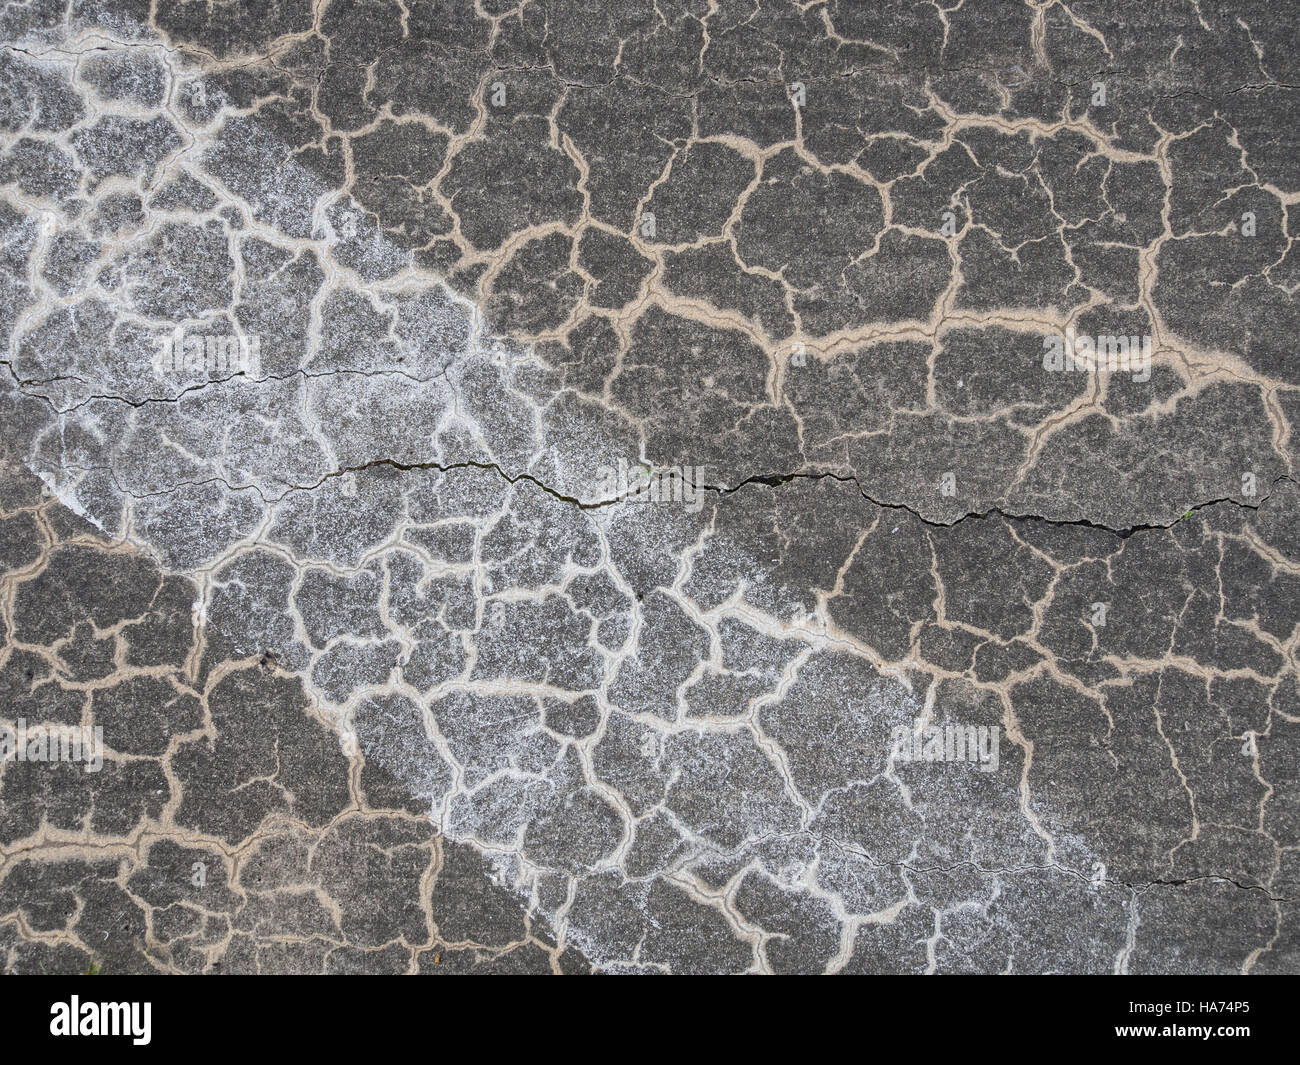 Structured surface of a weathered, cracked gray concrete pavement with diagonal strip of white paint Stock Photo